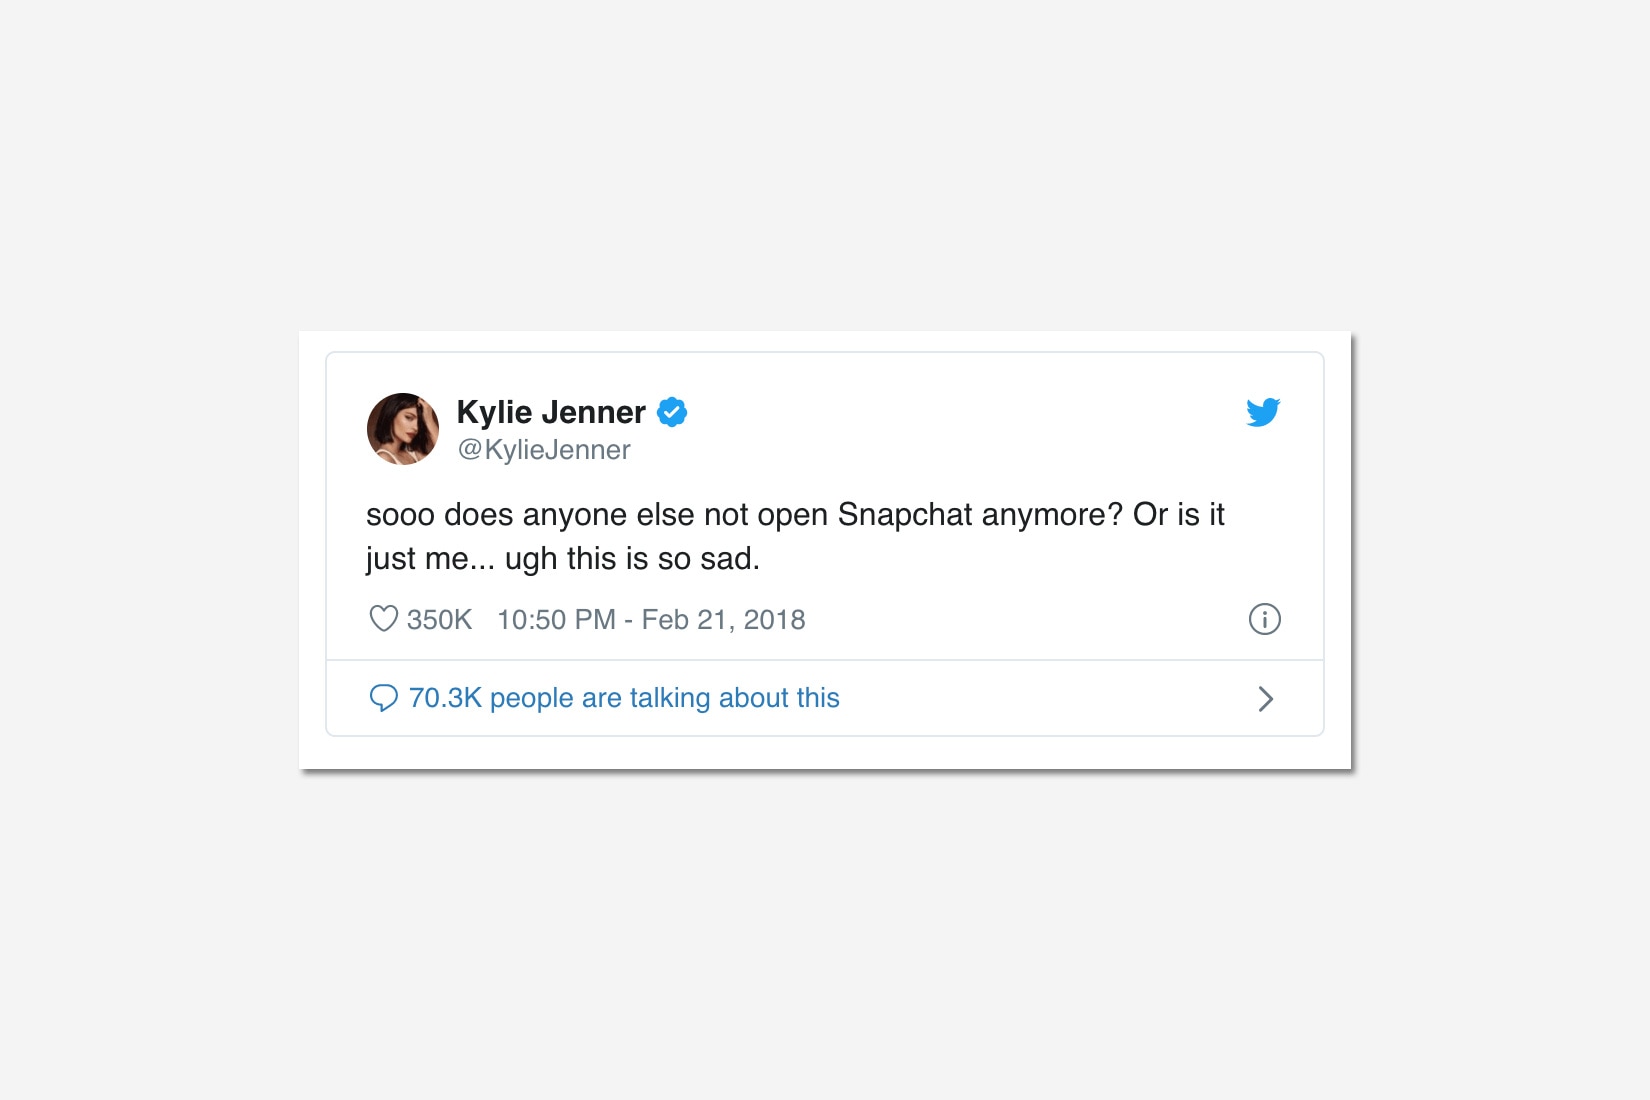 Kylie Jenner Snapchat Twitter post DTC luxe - Luxe Digital